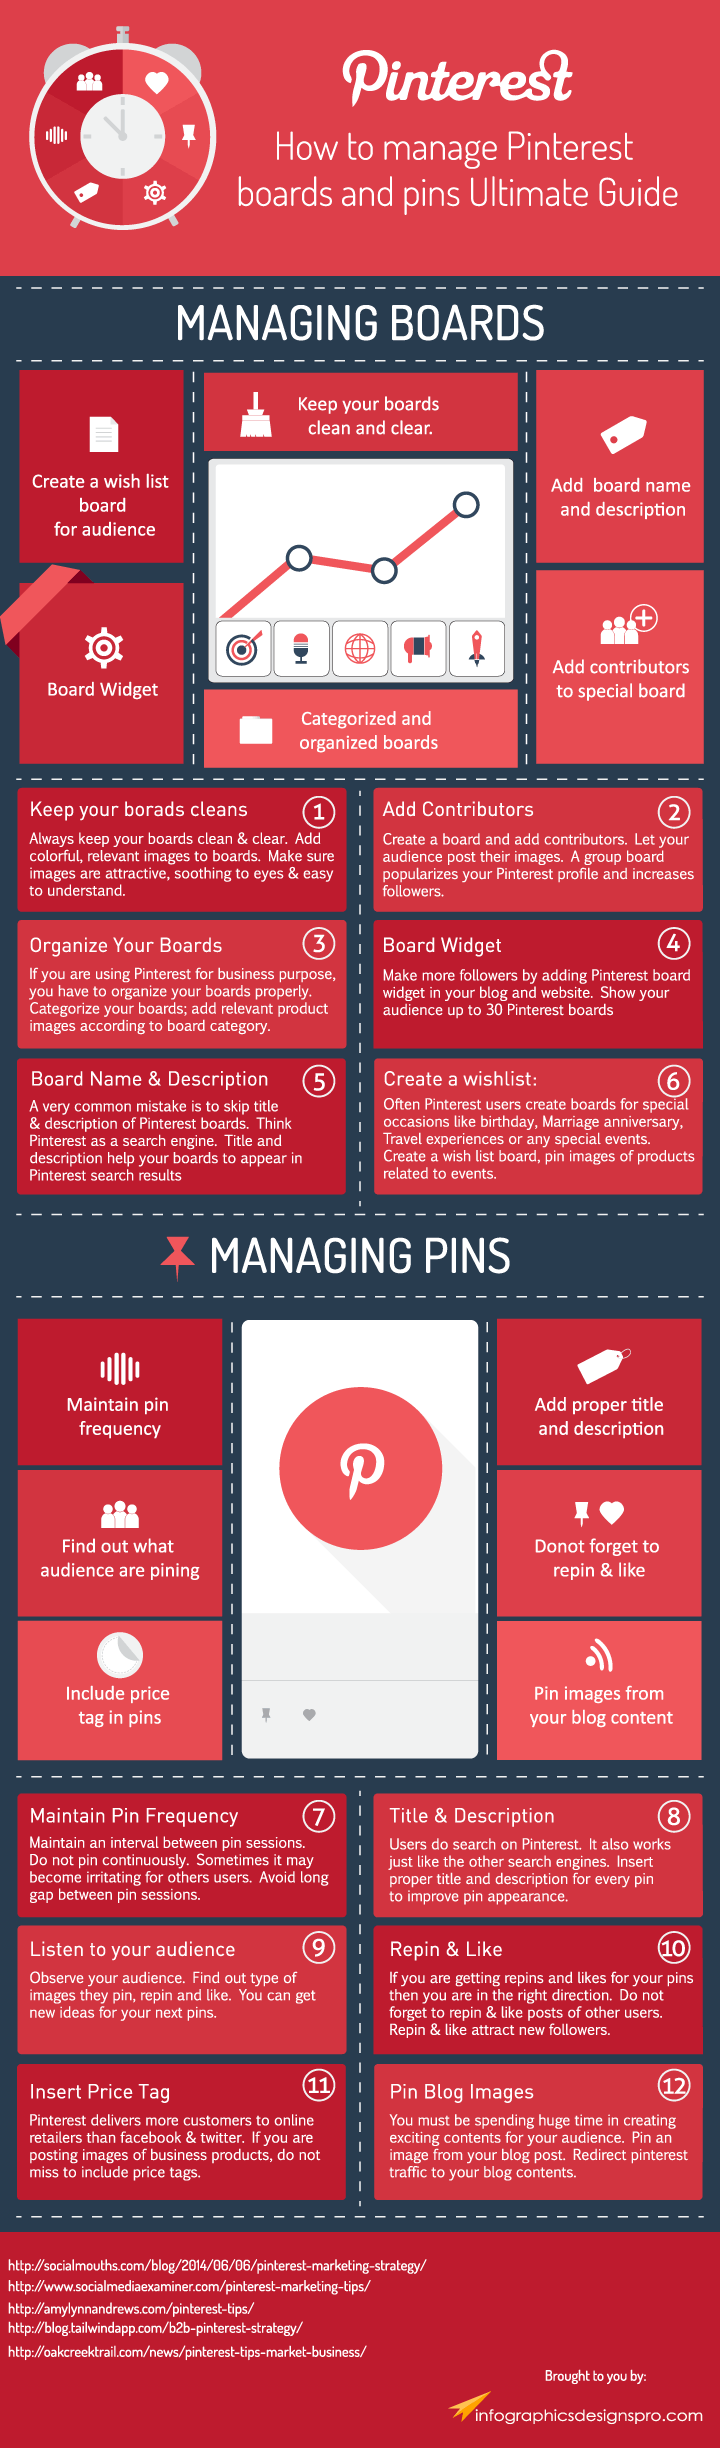 The Art Of Managing Pinterest Pins And Boards – #infographic #socialmedia